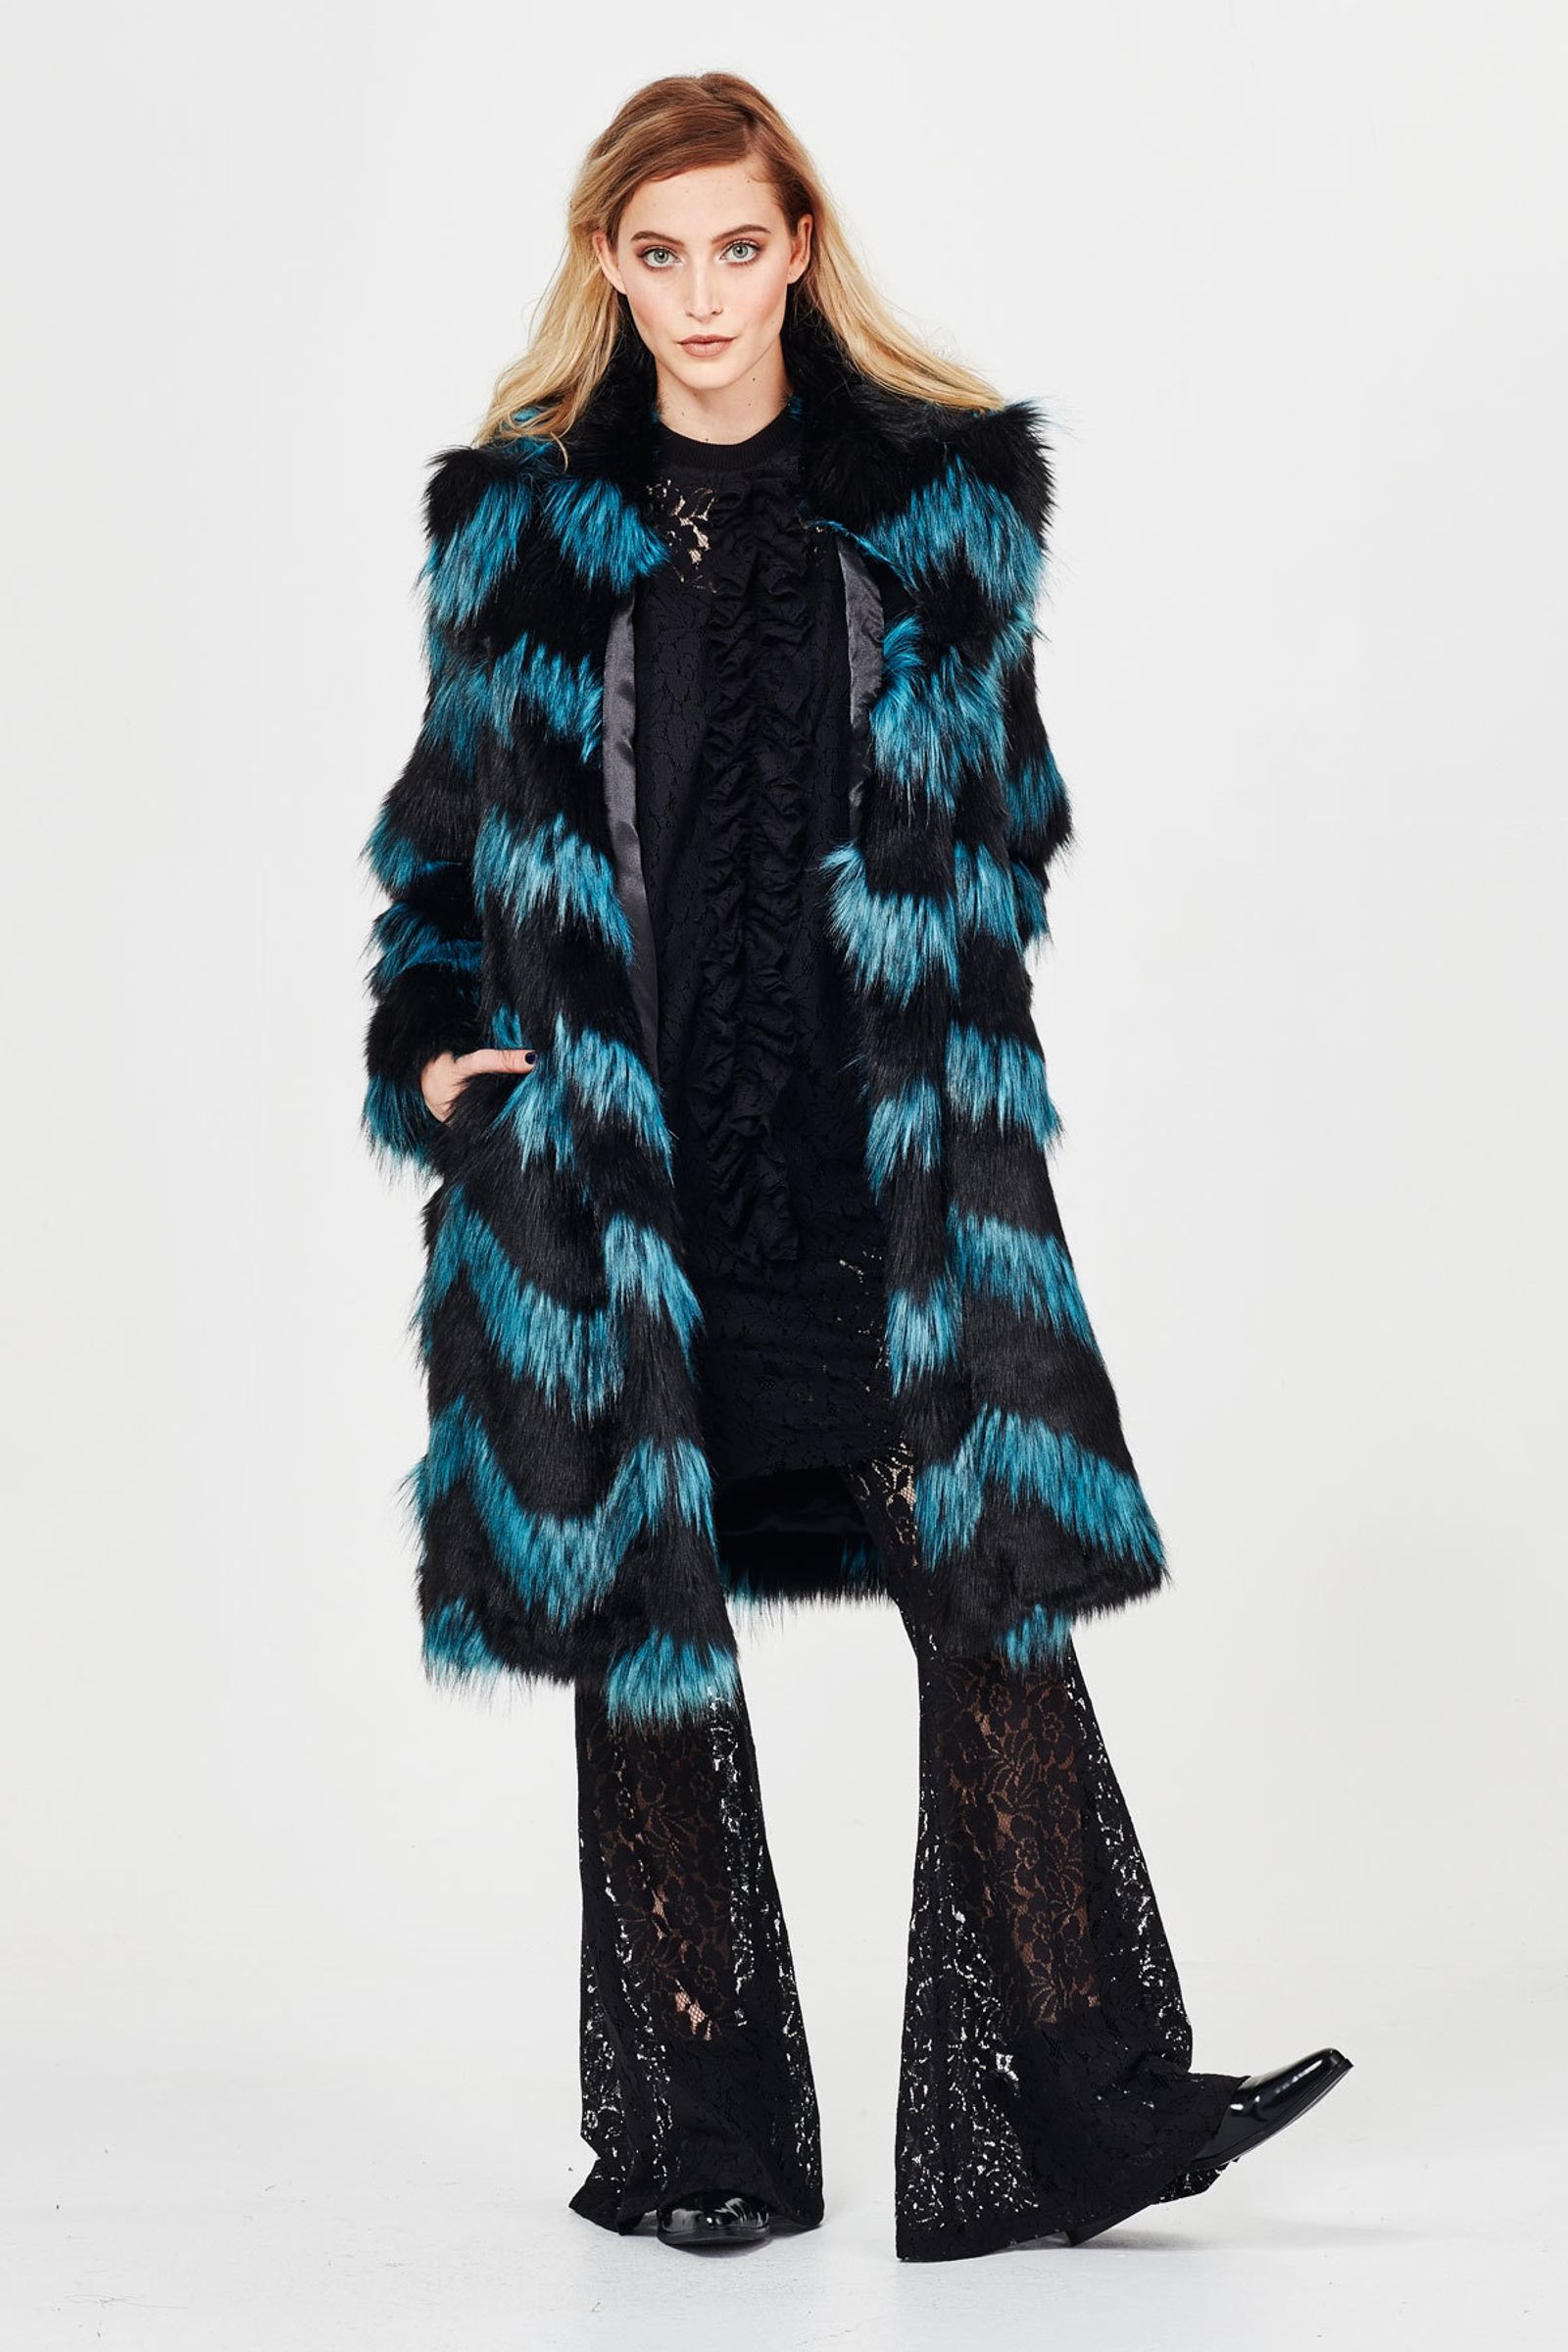 LACED UP 'HOW LACED IS YOUR LOVE' DRESS
								, 			LACED UP 'WEAR AND FLARE' PANT
								, 			FUR SURE 'ELECTRIC AVENUE' COAT